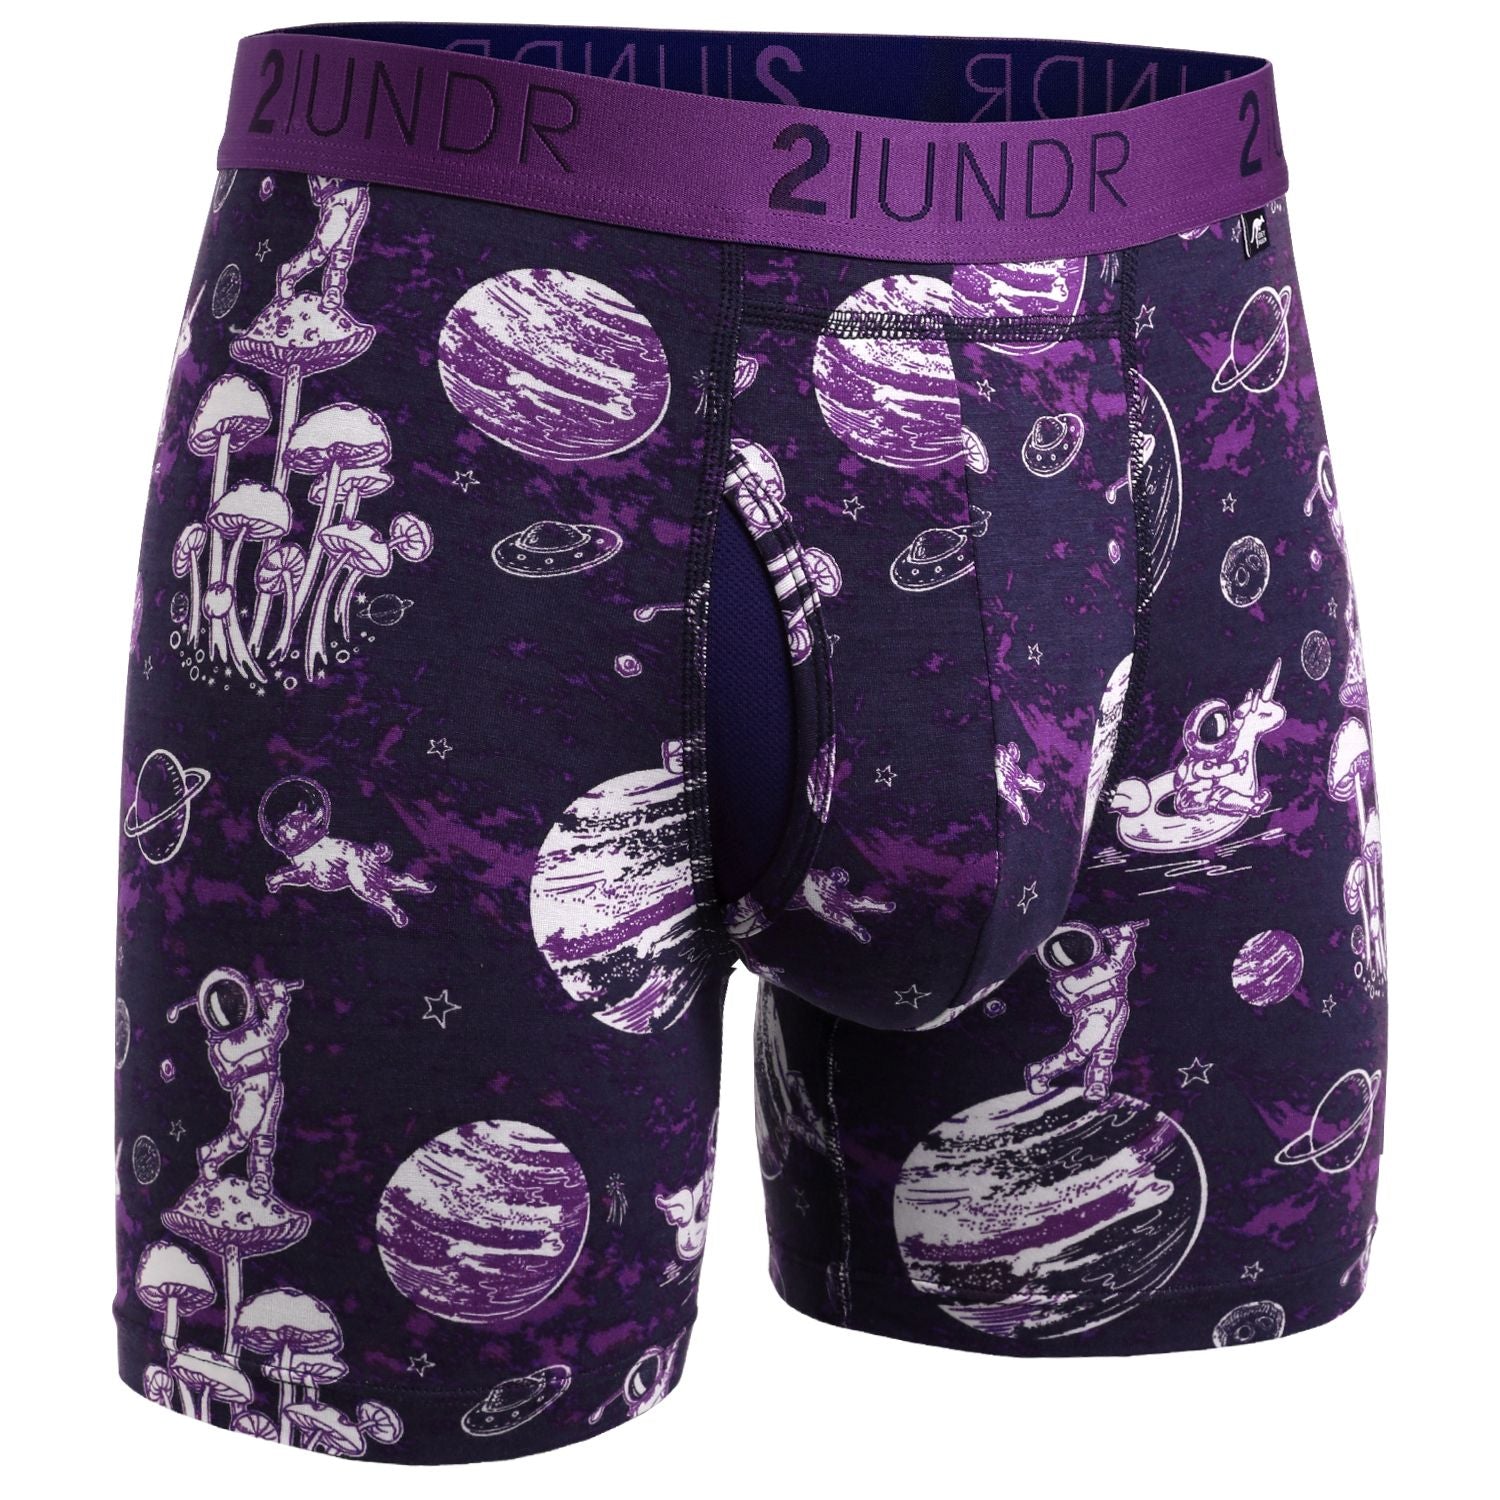 2Undr Swing Shift Boxer Brief Prints - Space Golf Navy